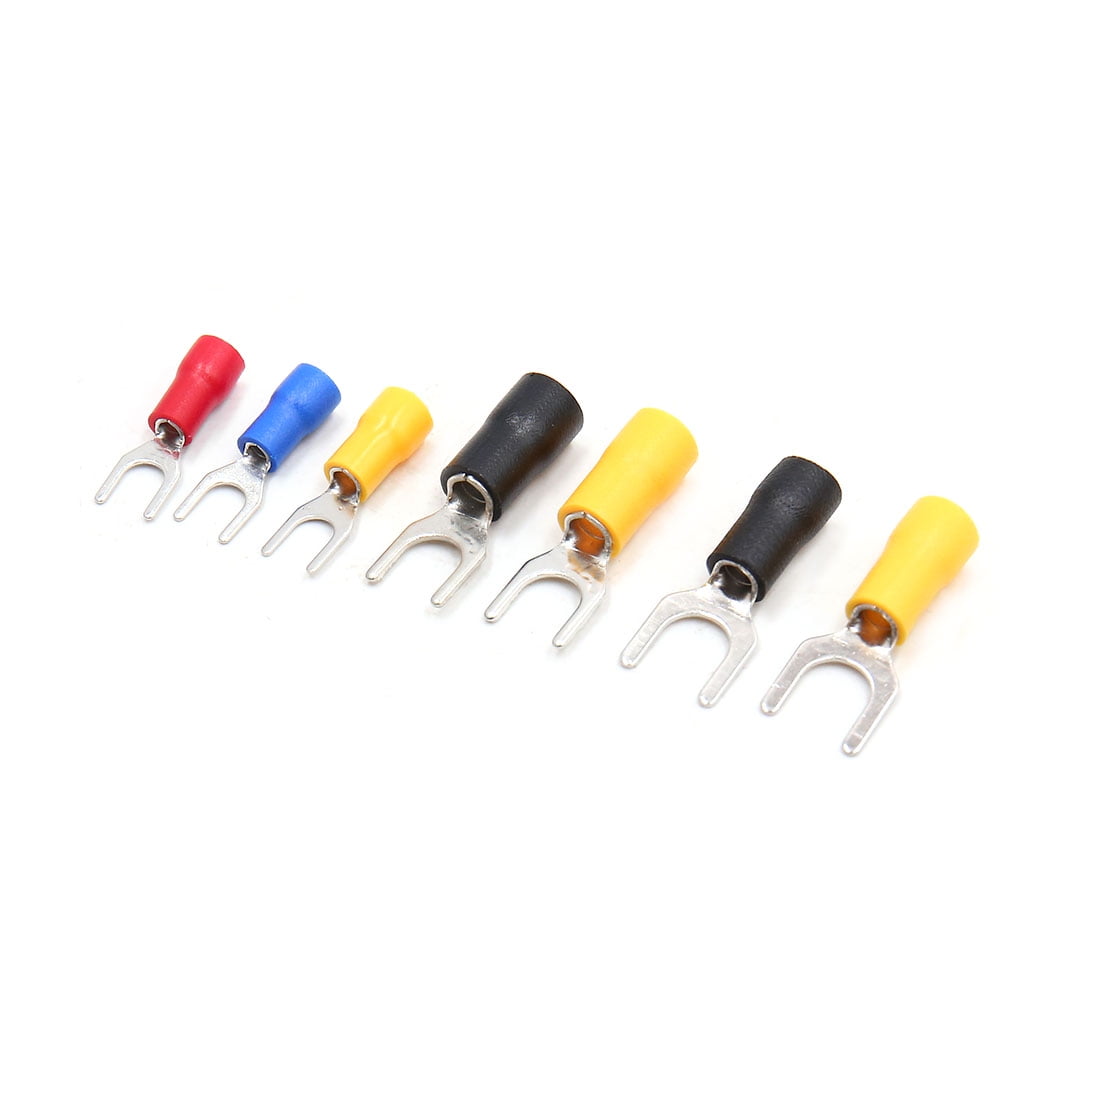 10 X Connector Crimp For Cable Electric since 0.5 a 1.5mm2 intersection 